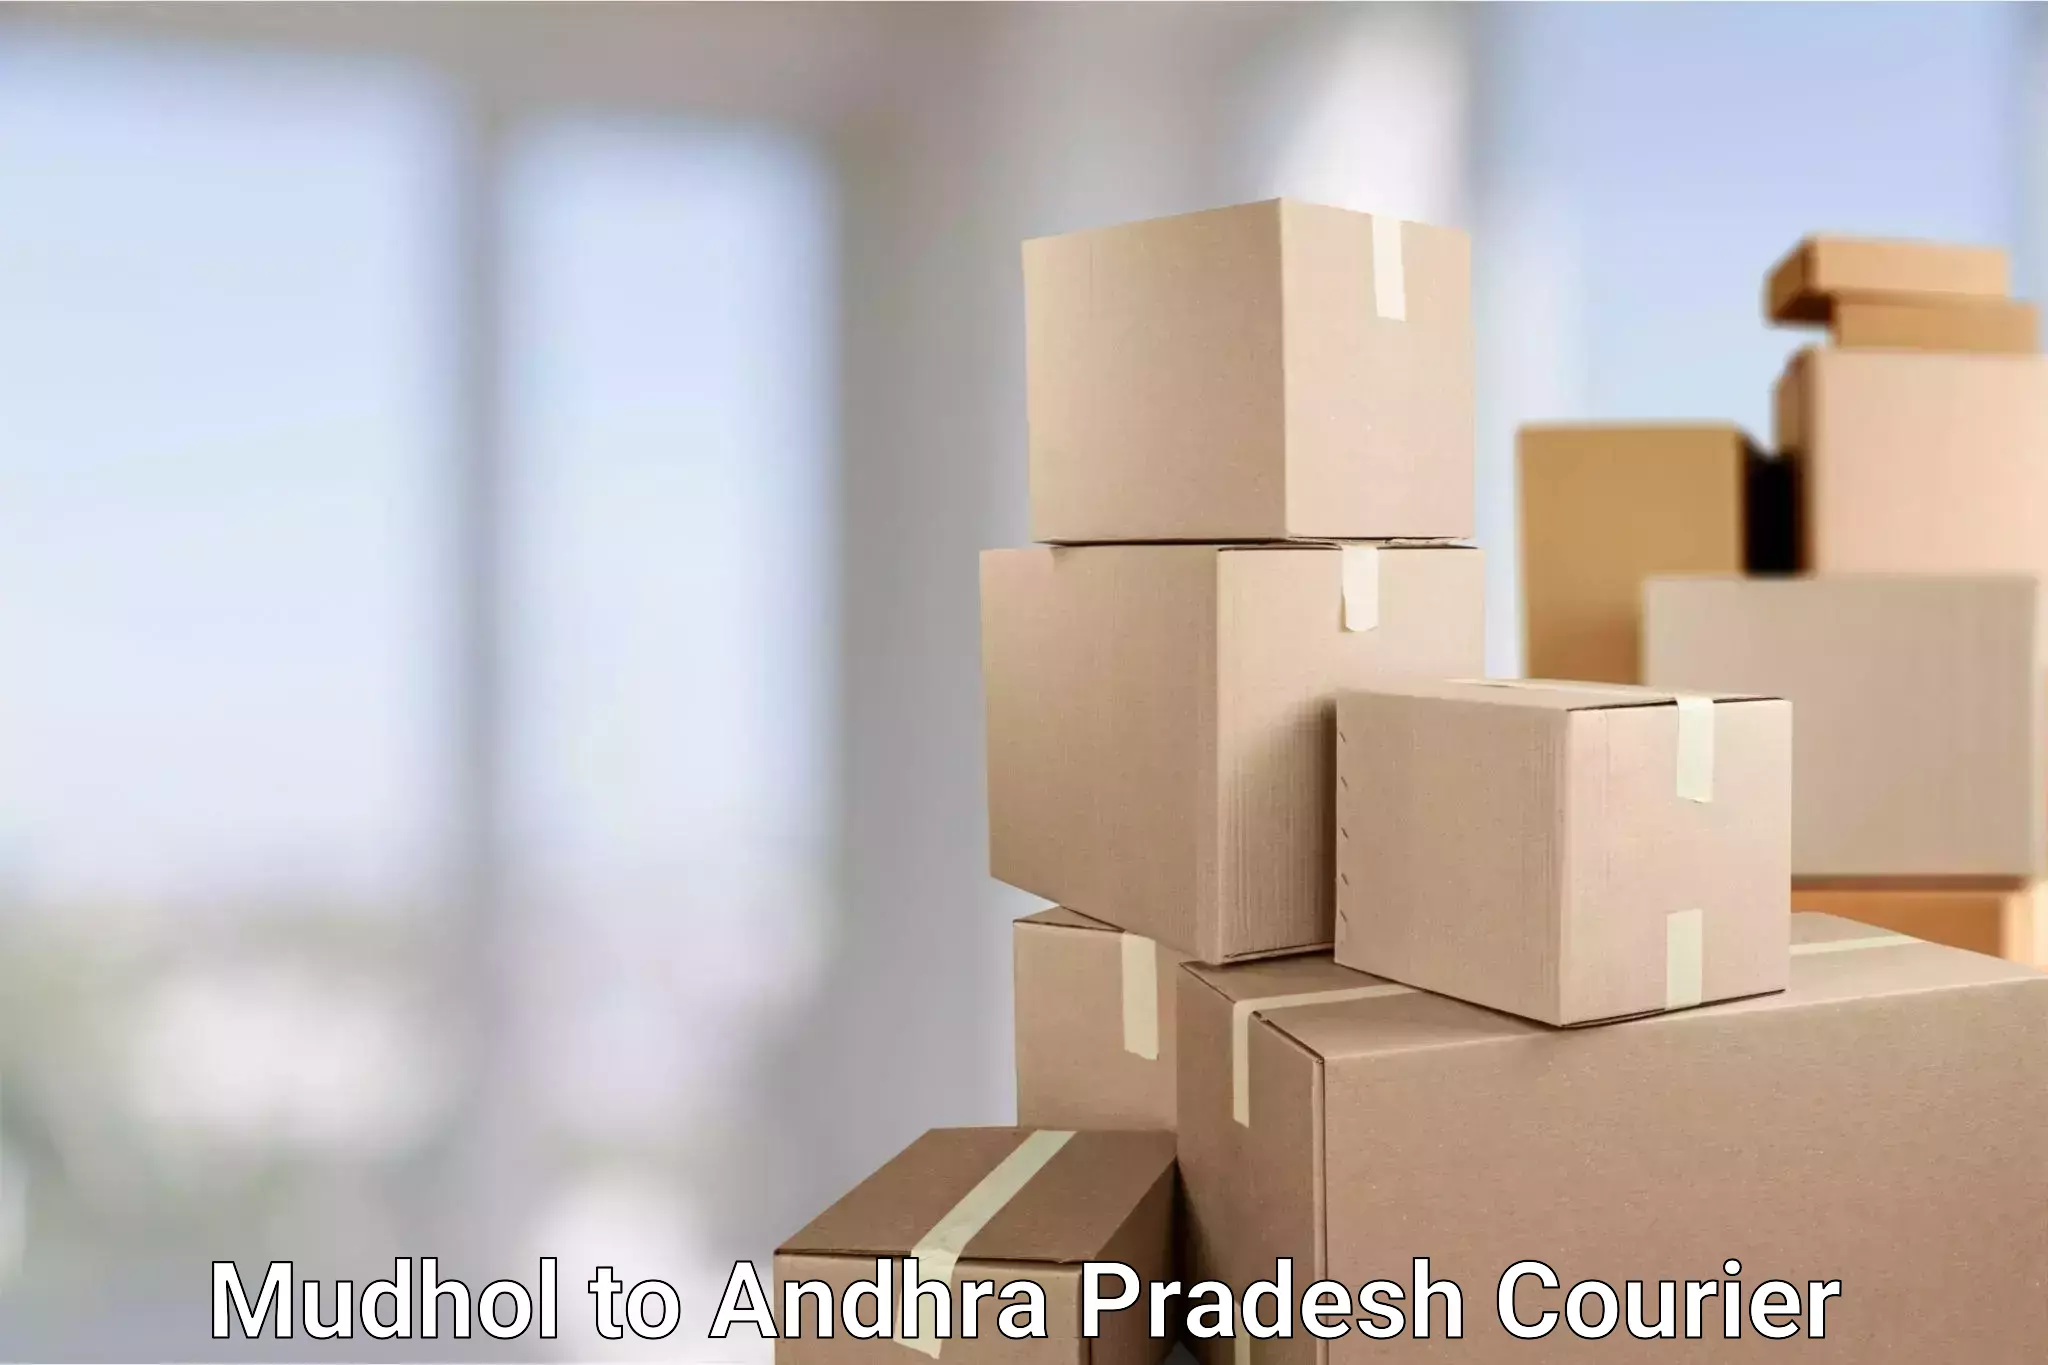 24/7 courier service Mudhol to Tripuranthakam